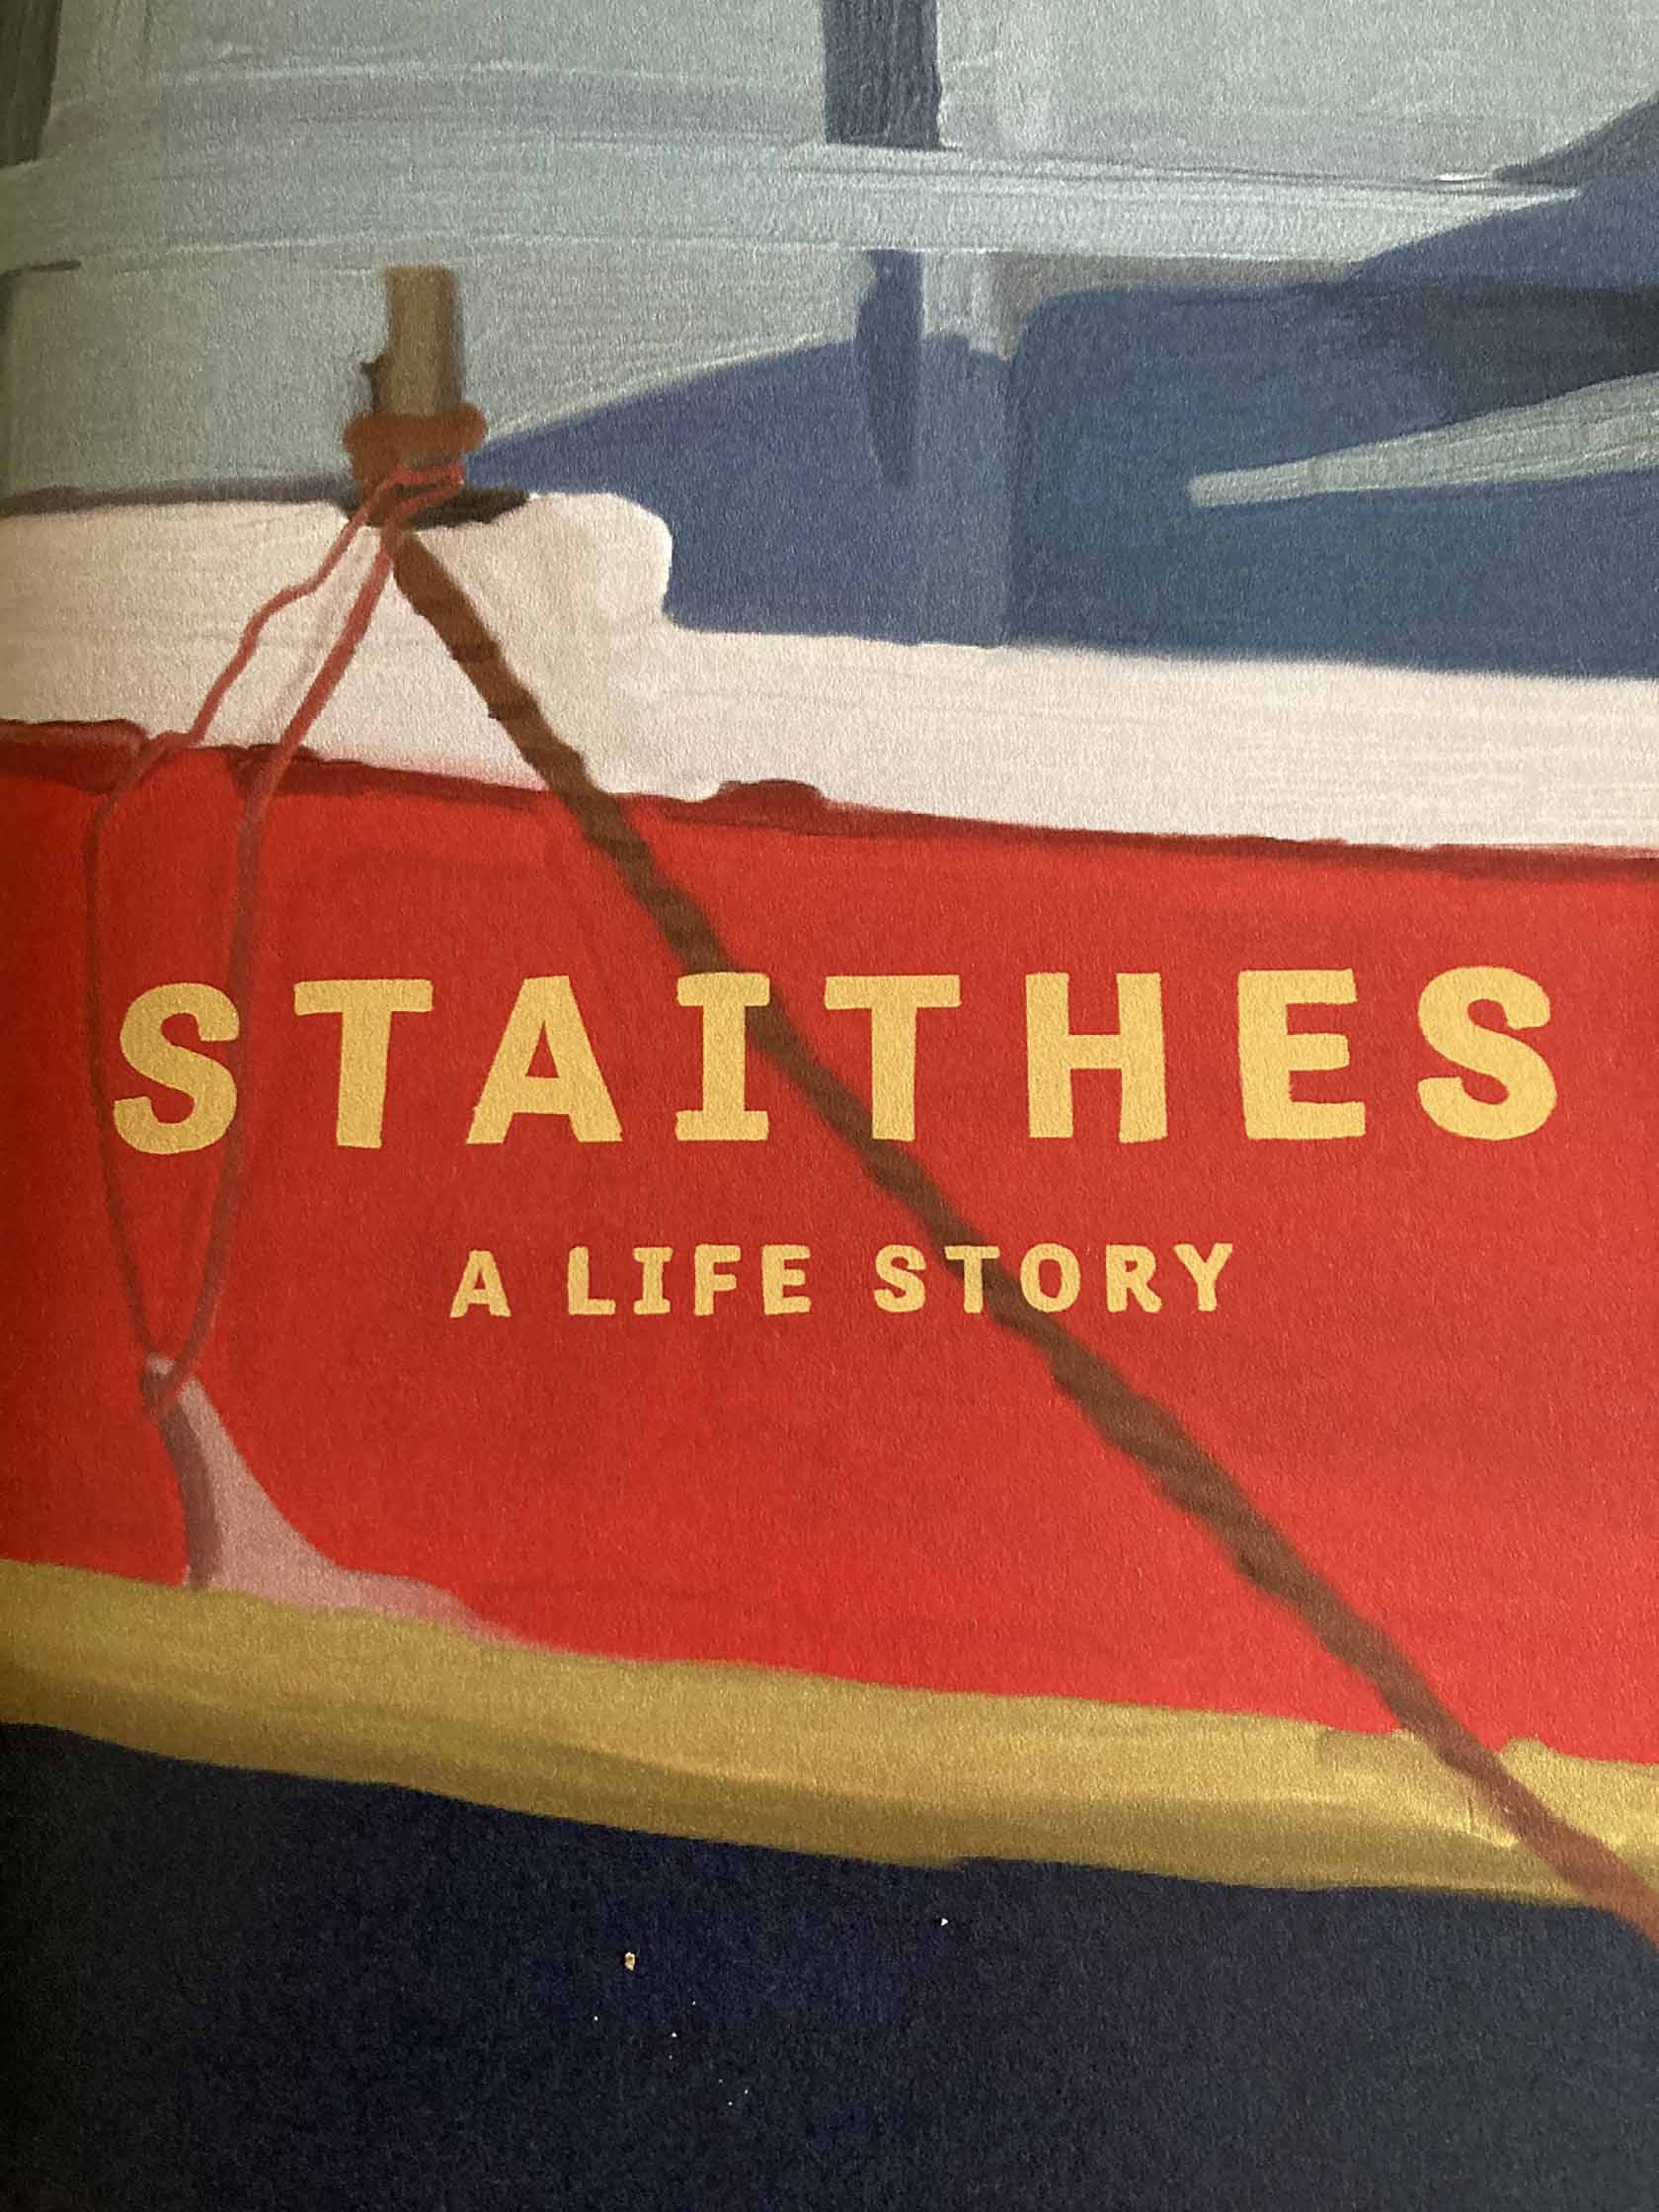 Staithes: A Life Story  book cover by Grant McKee